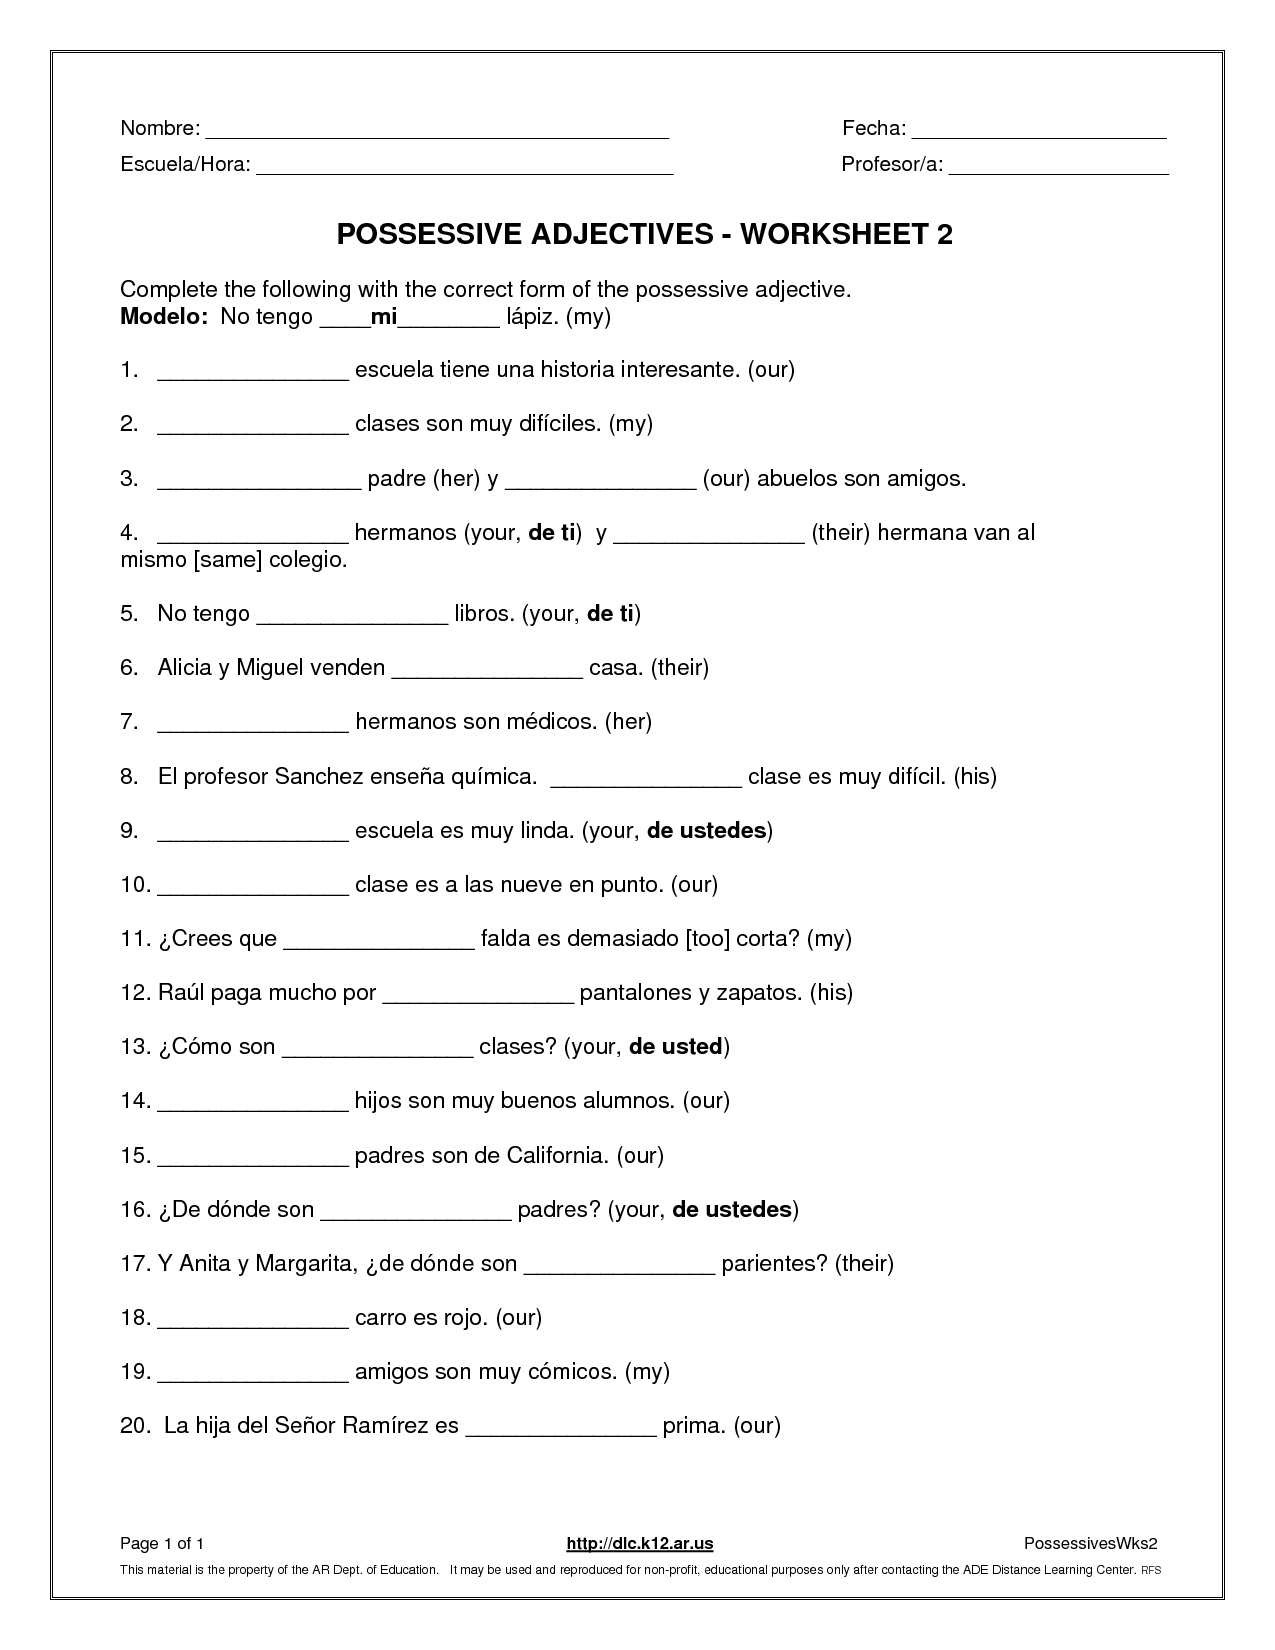 agreement-of-adjectives-spanish-worksheet-answers-108625-db-excel